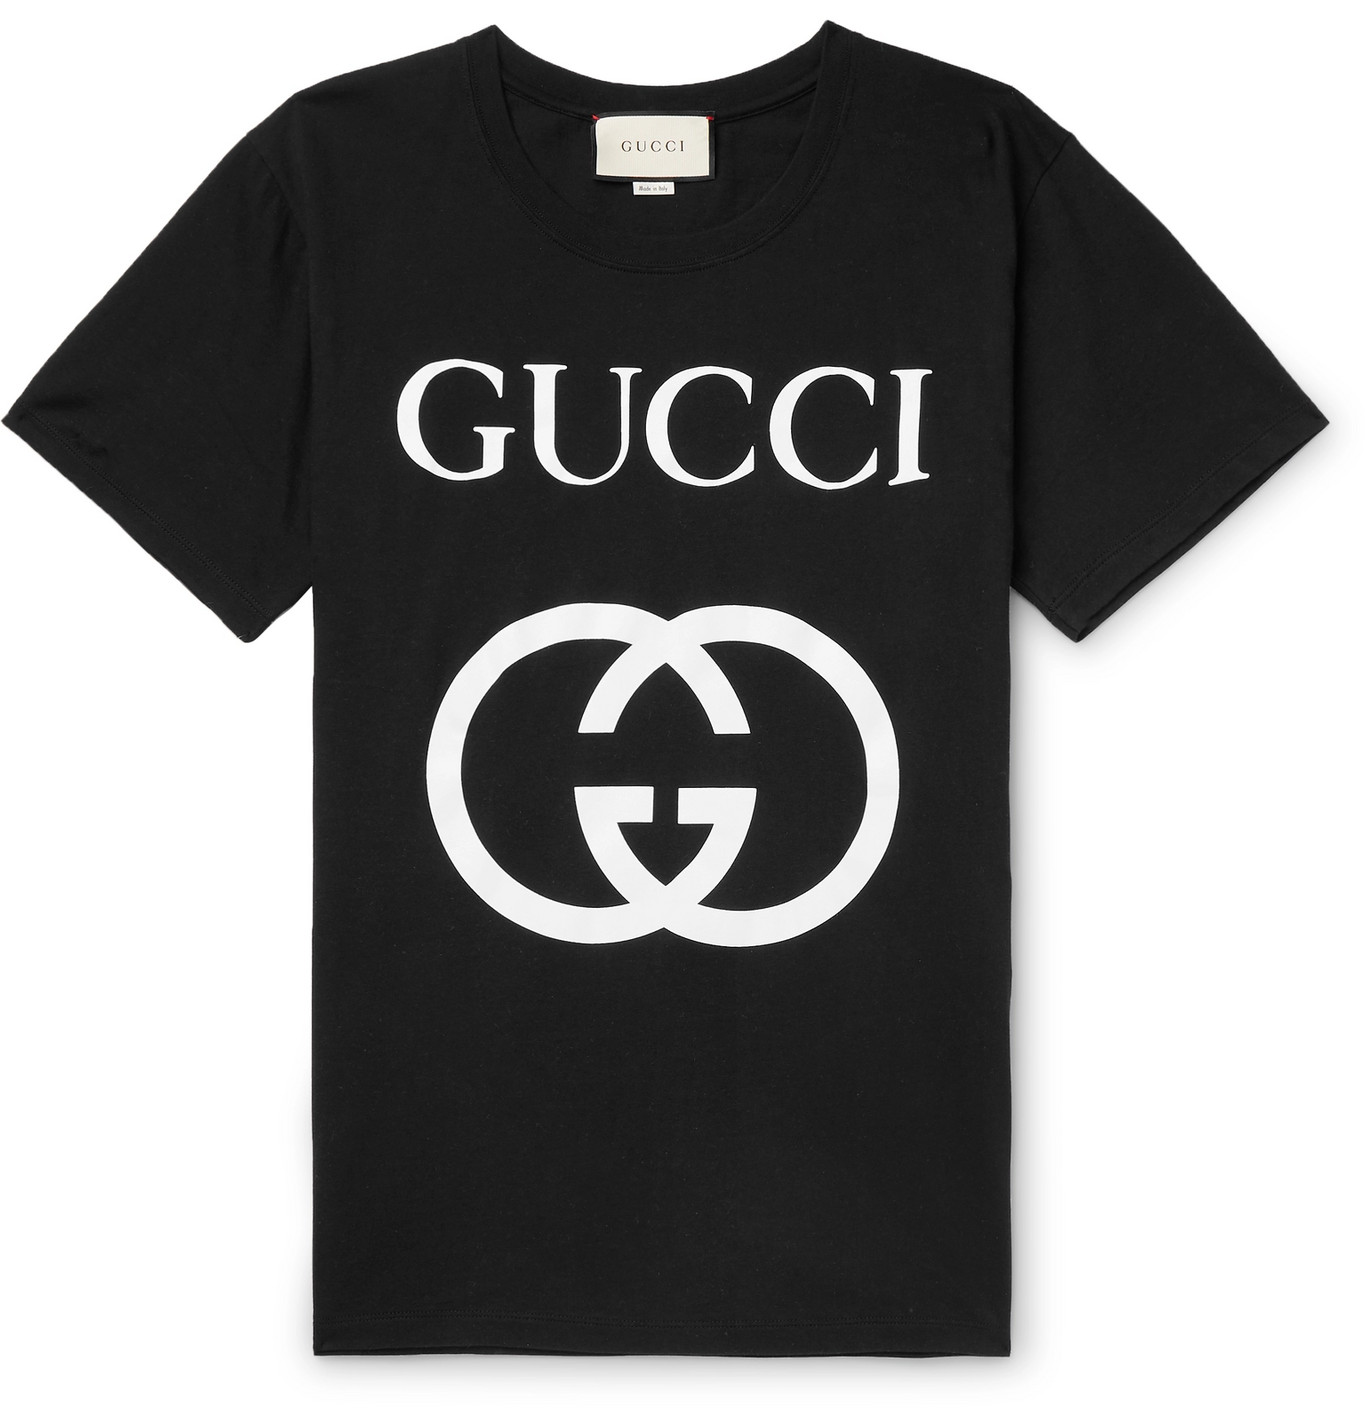 Top Clothing Brands Like Gucci - Best Design Idea